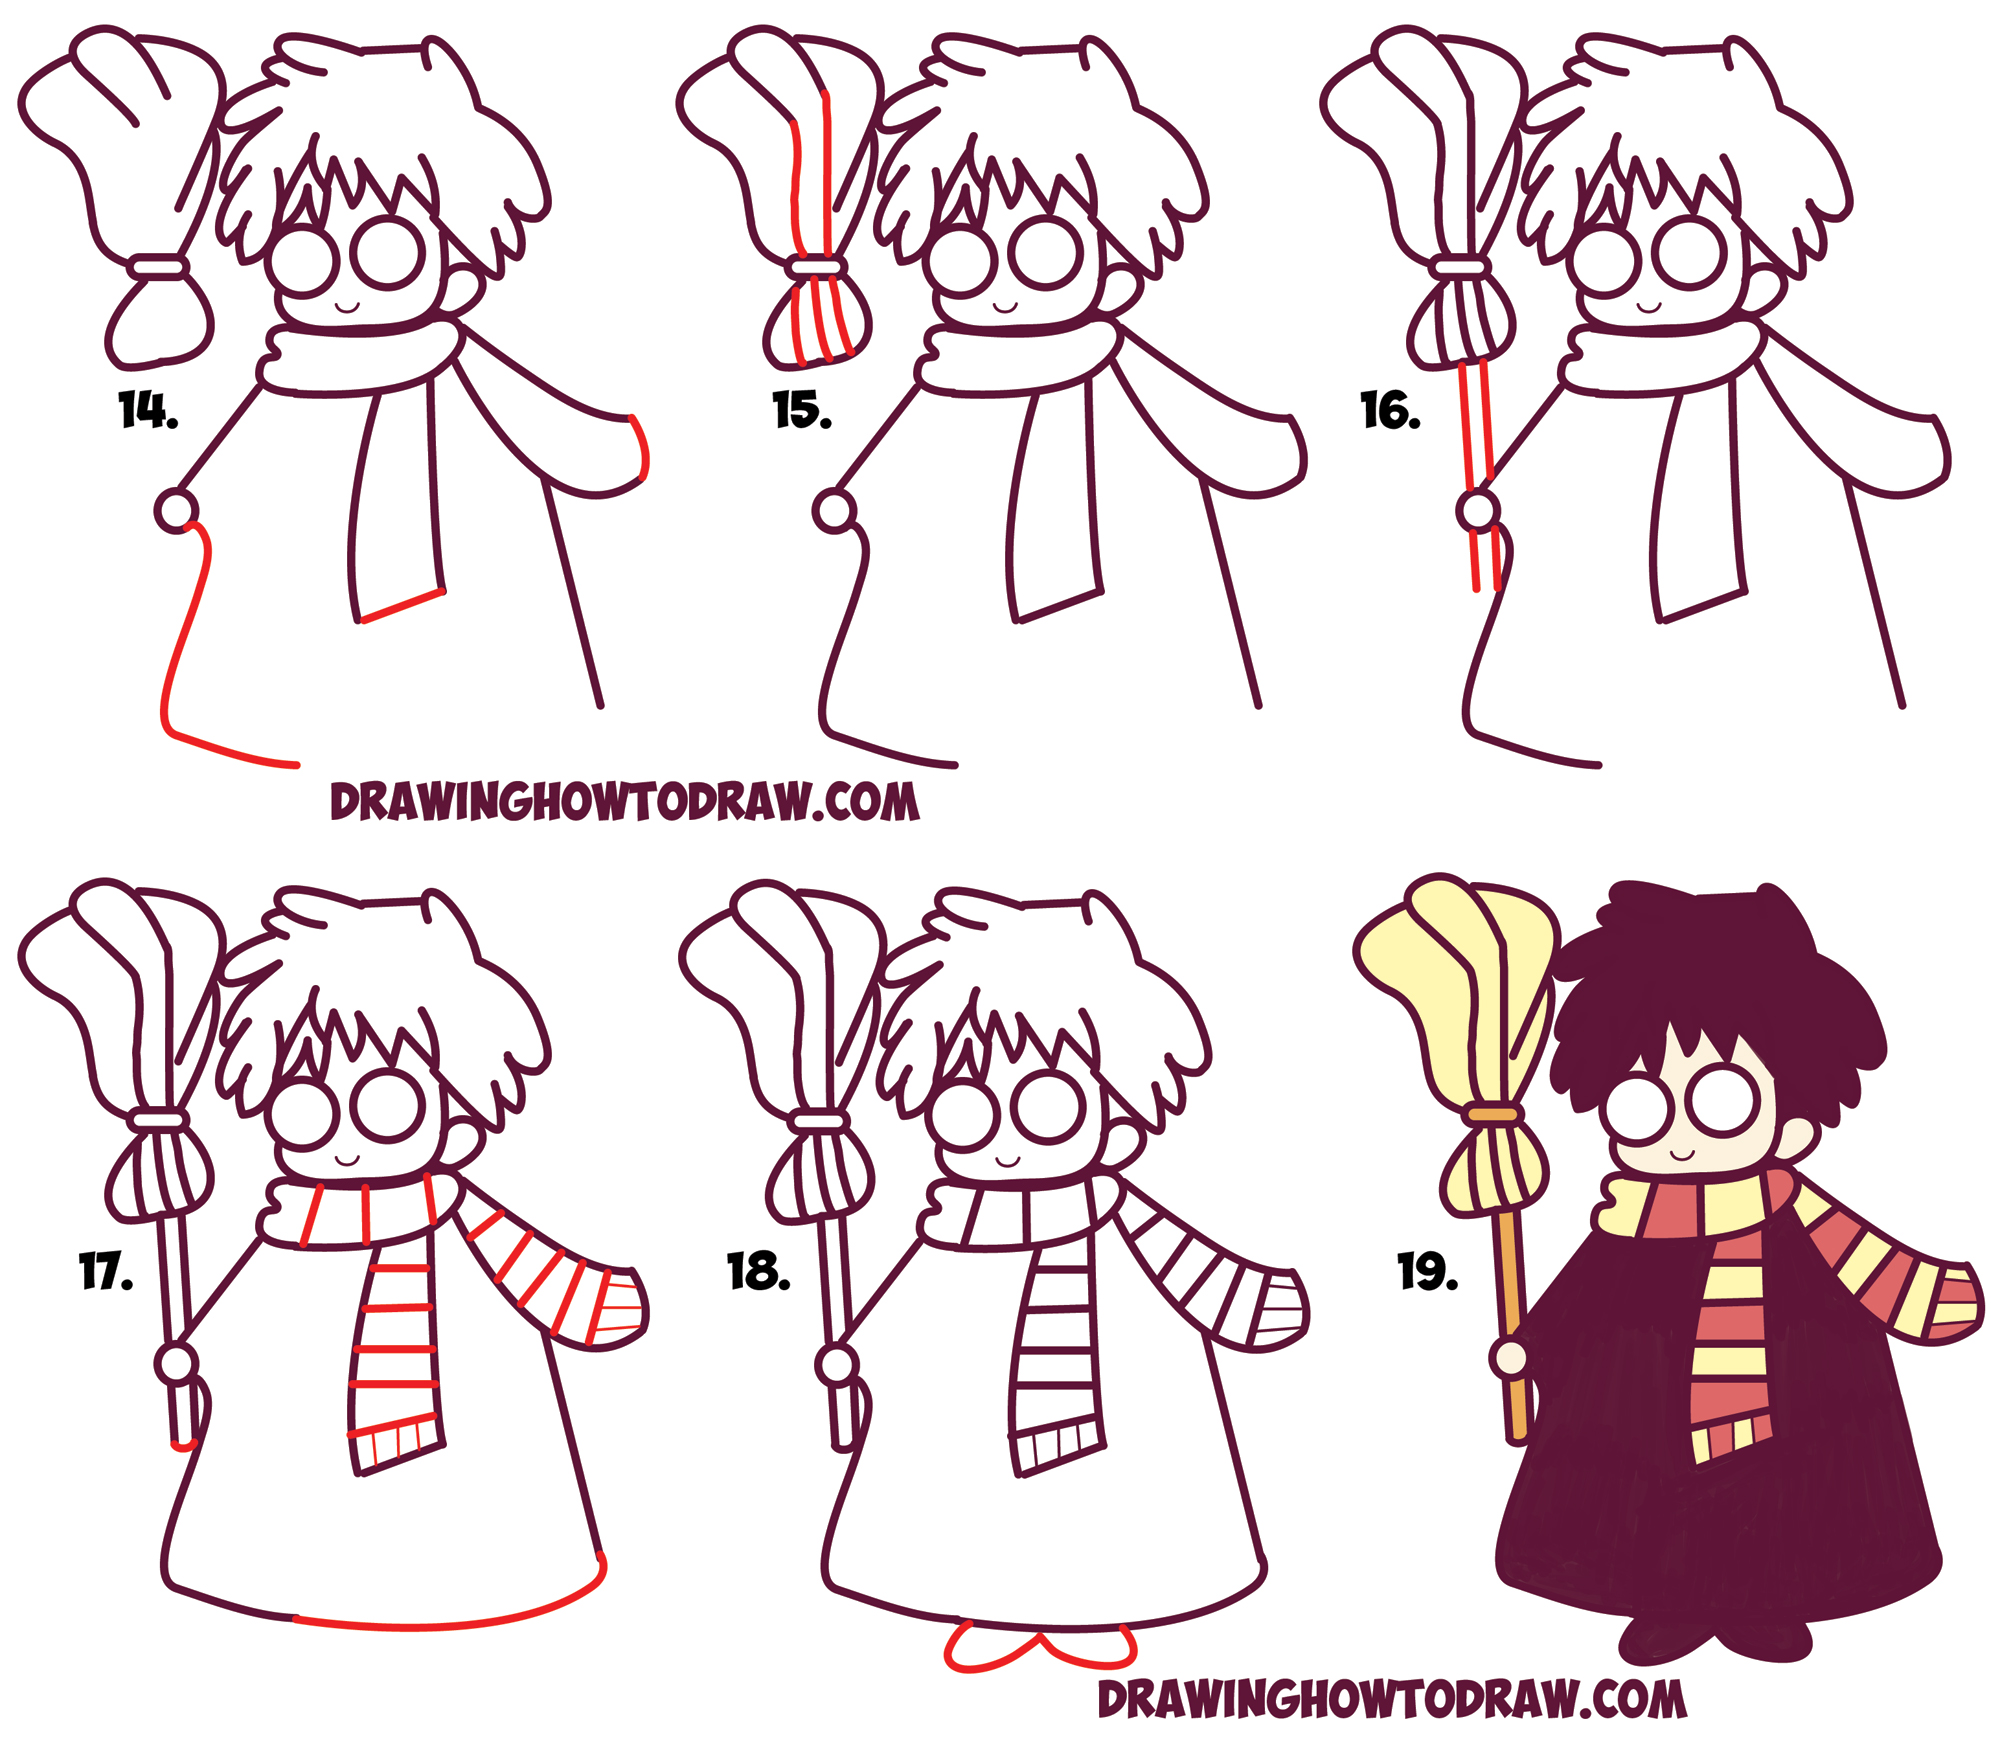 How To Draw Harry Potter Characters Cartoon